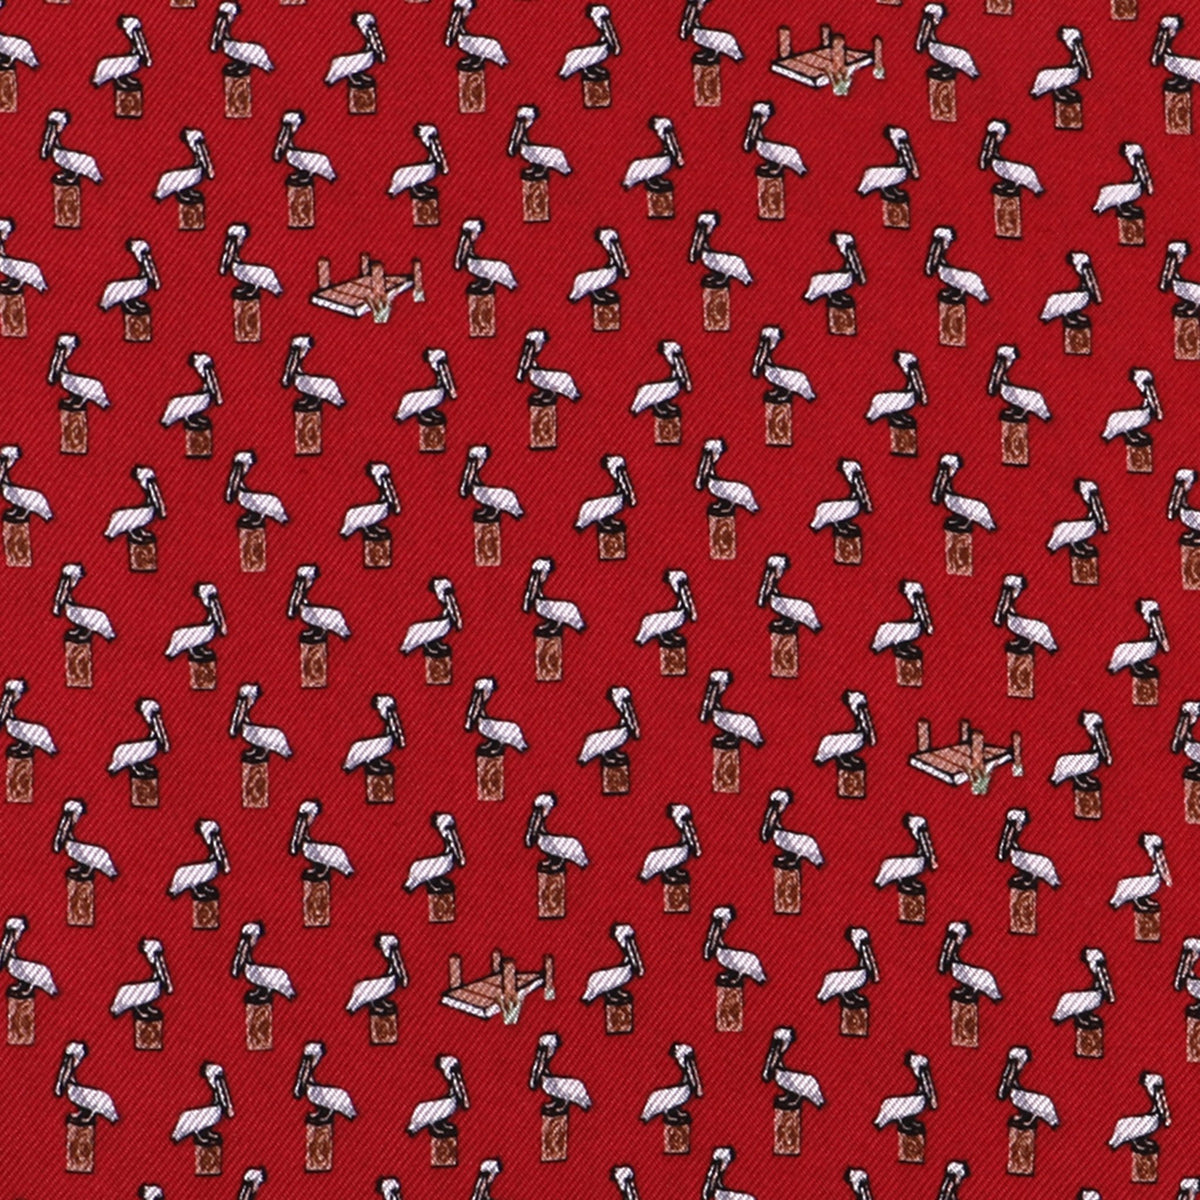 Limited Edition NOLA Couture X Haspel Red Pelican Print Pocket Square - O/S